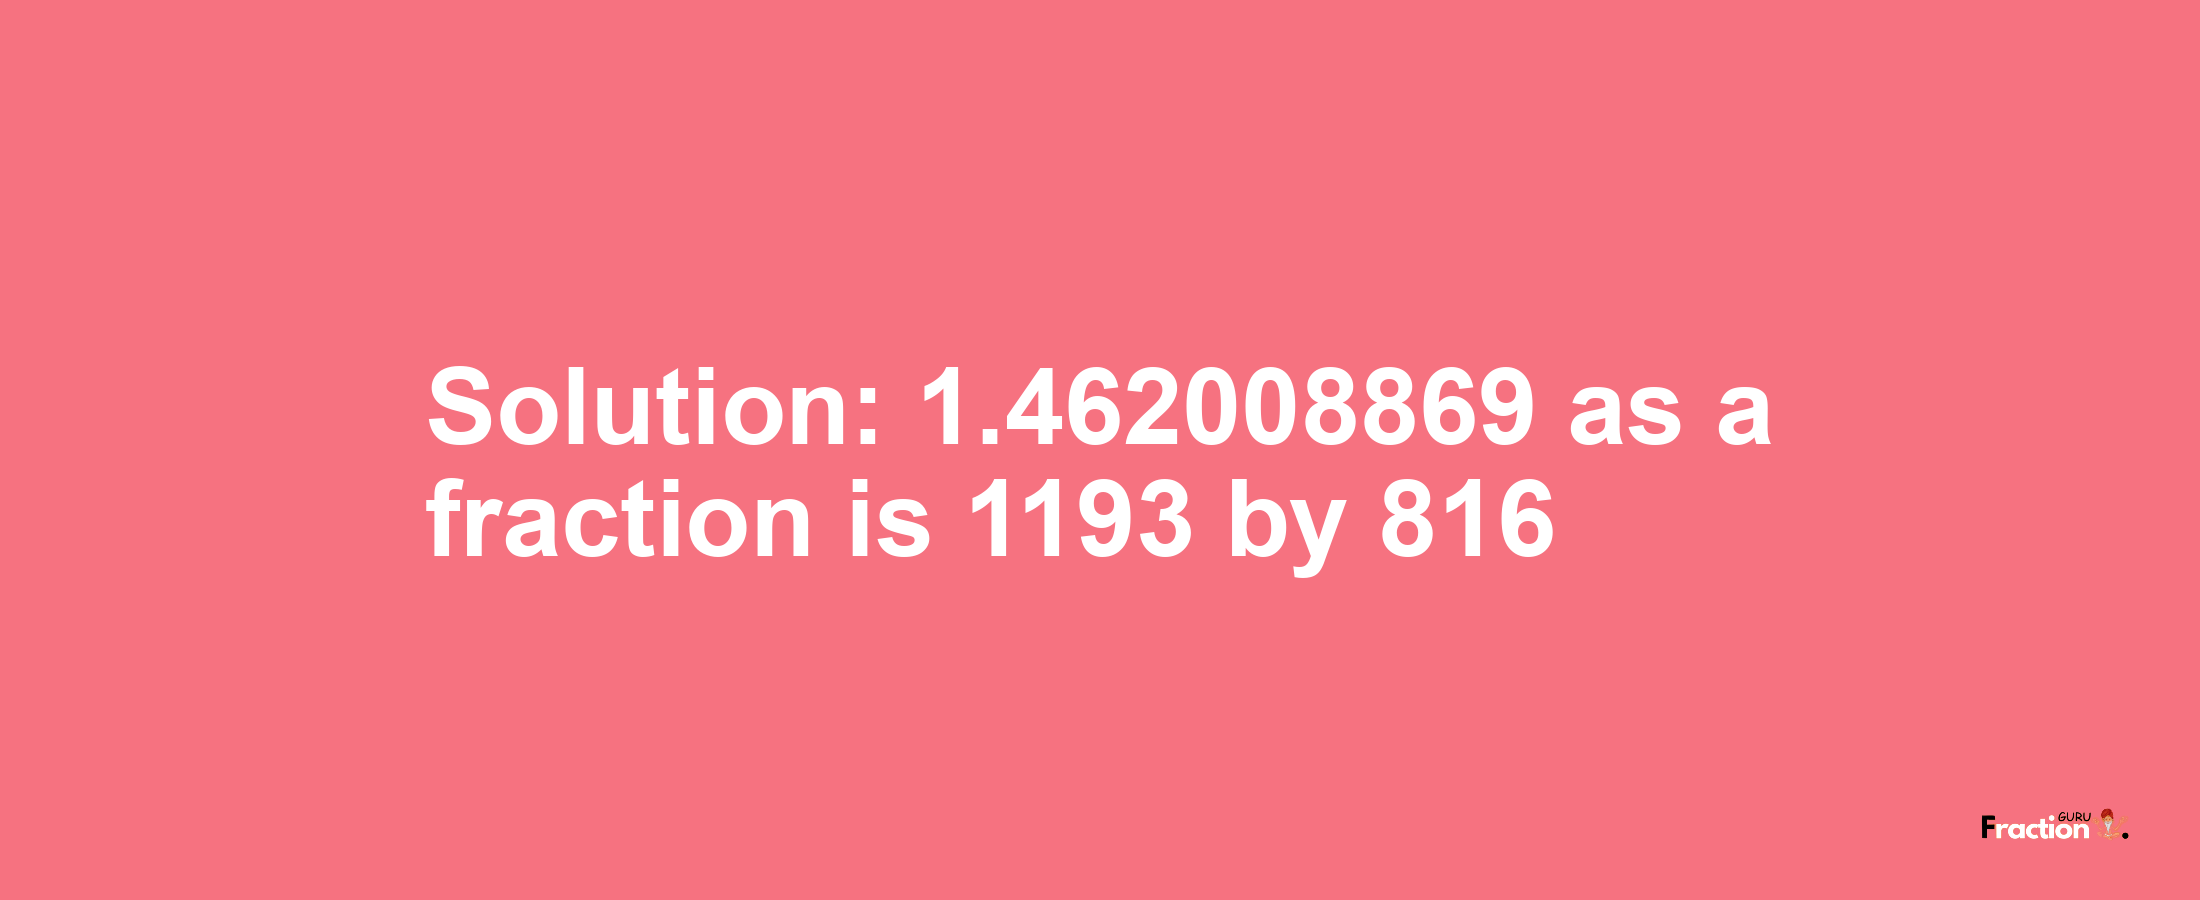 Solution:1.462008869 as a fraction is 1193/816